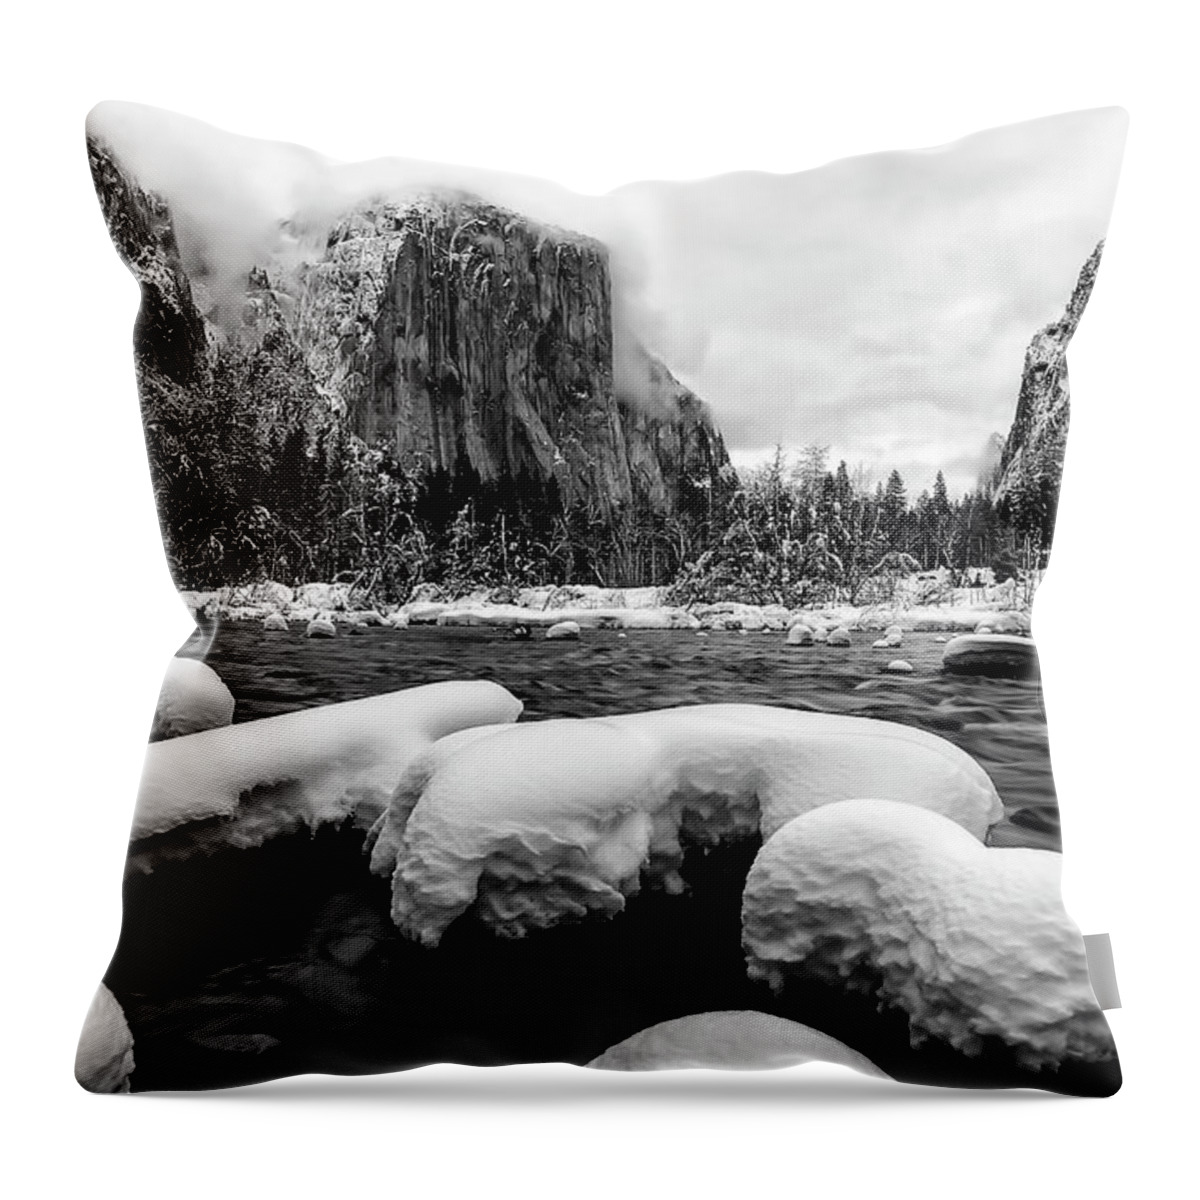 Gary Johnson Throw Pillow featuring the photograph Valley View Snow by Gary Johnson